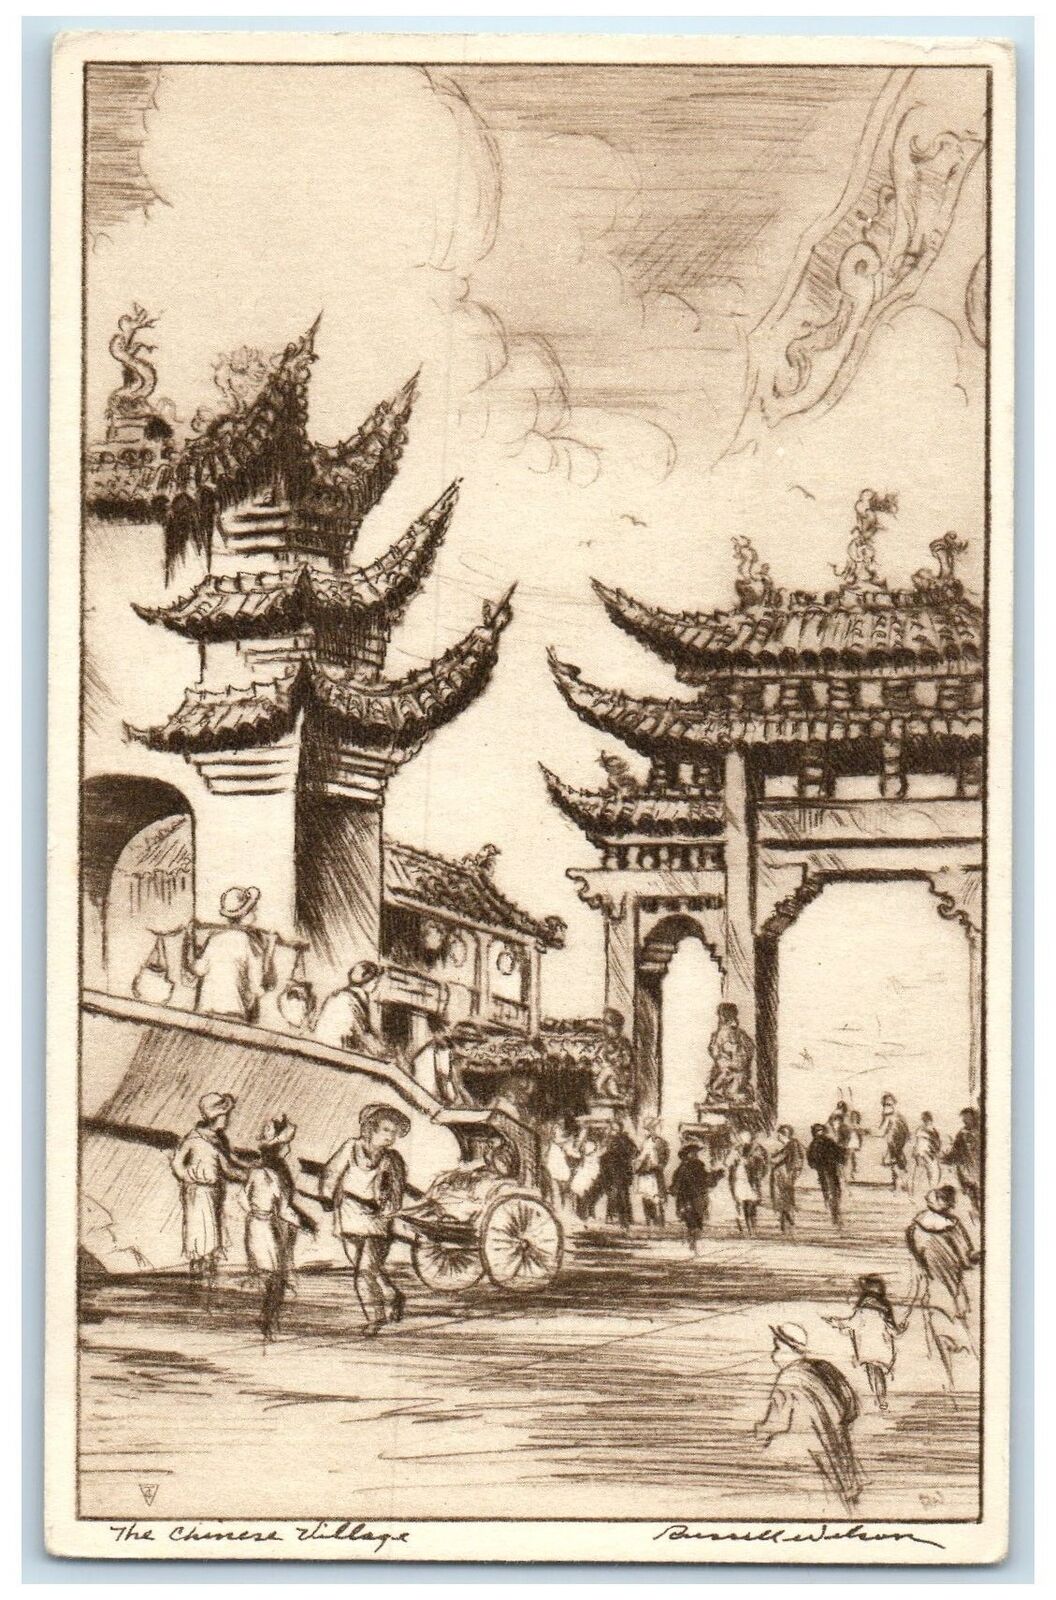 c1960 The Chinese Village Exposition Sketch San Francisco California CA Postcard